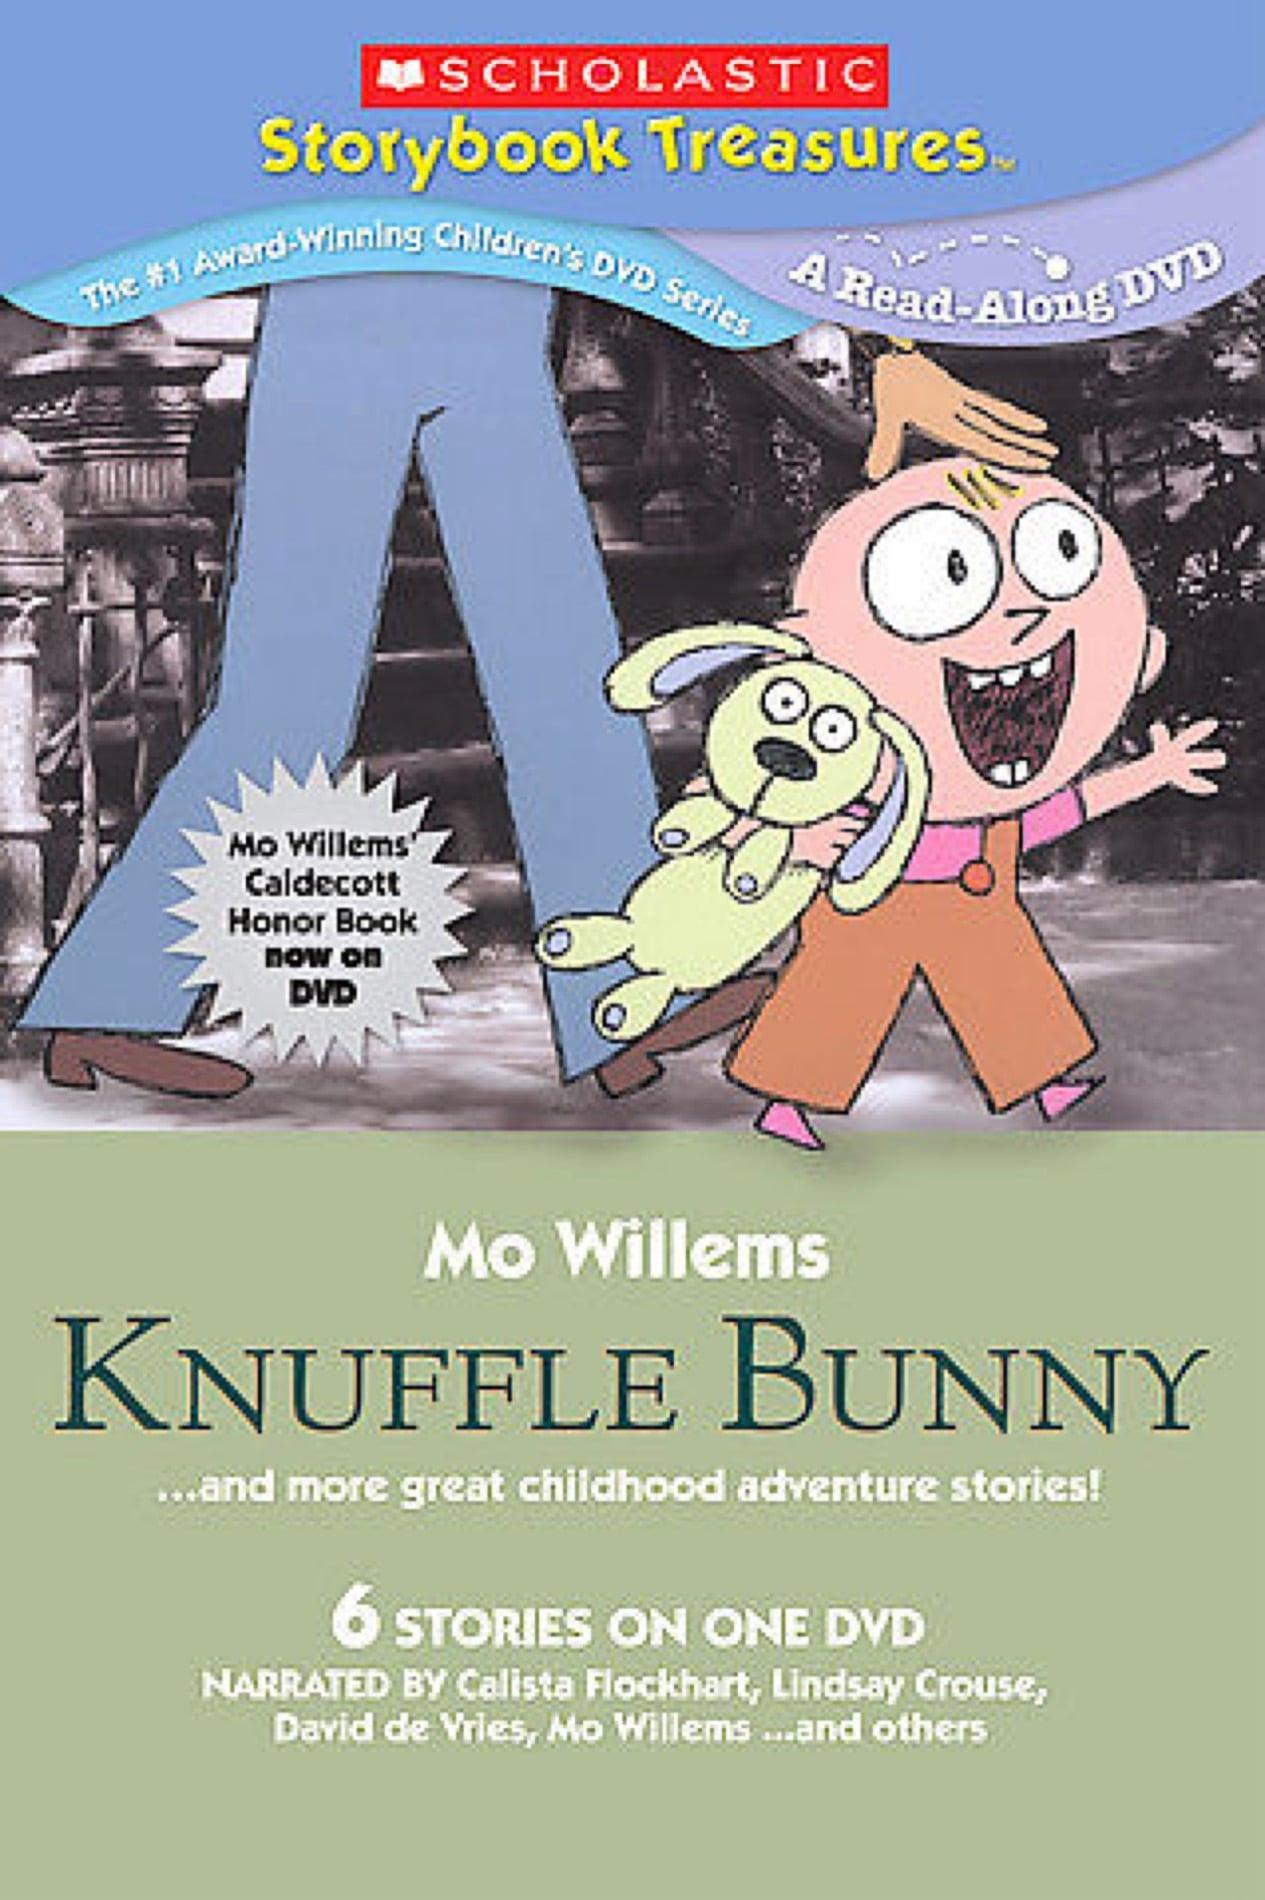 Knuffle Bunny: A Cautionary Tale poster